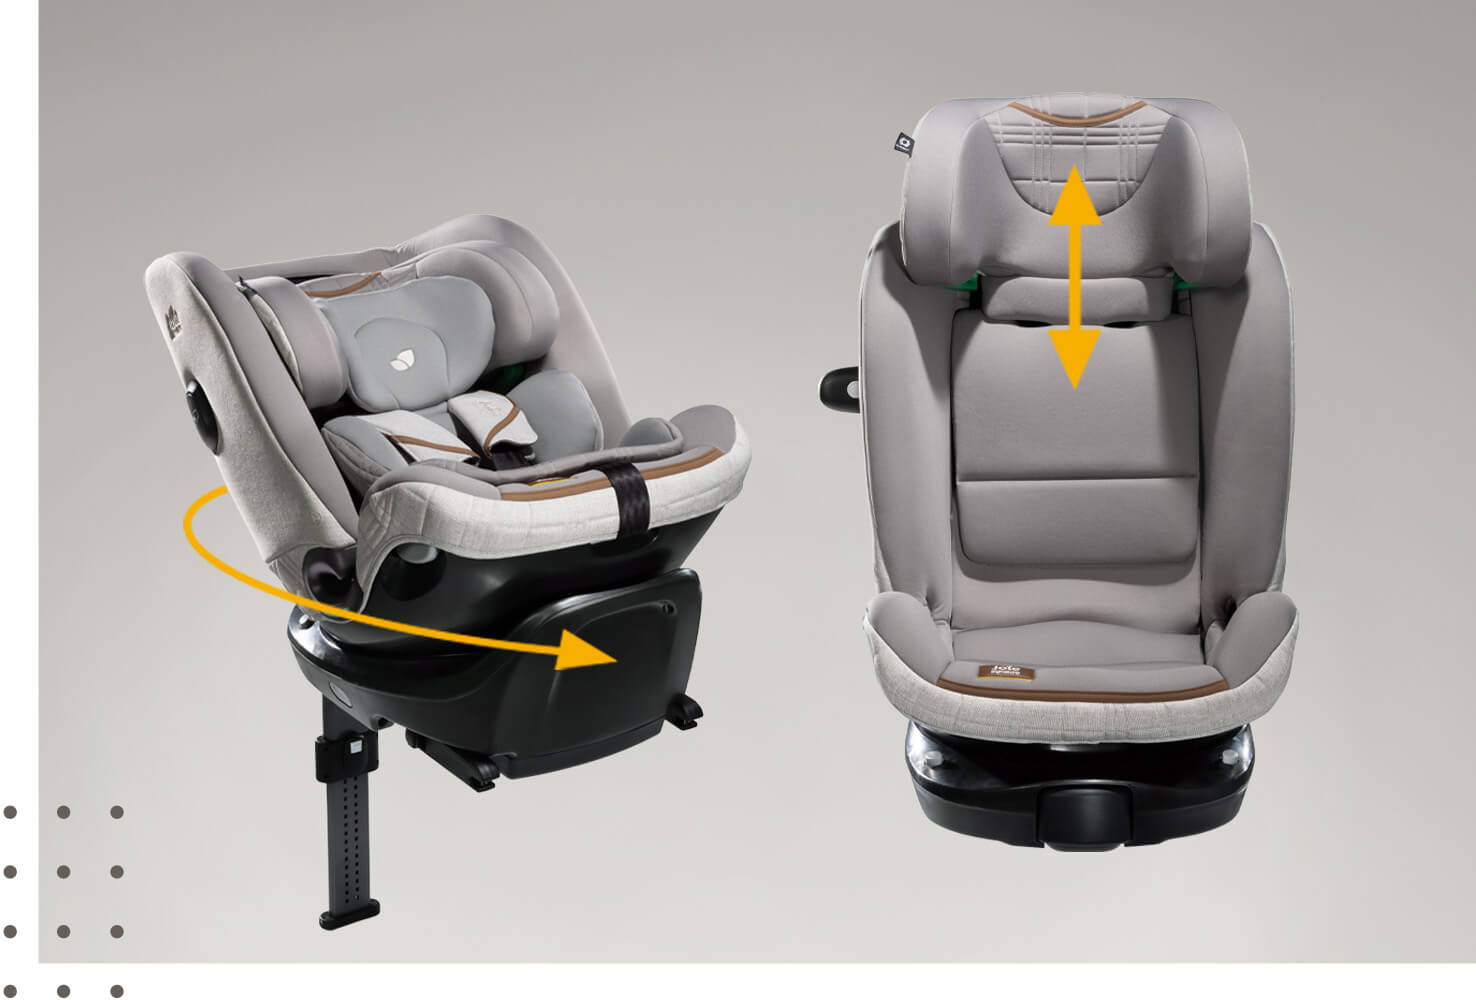 Joie i-Spin Safe car seat review - Car seats from birth - Car